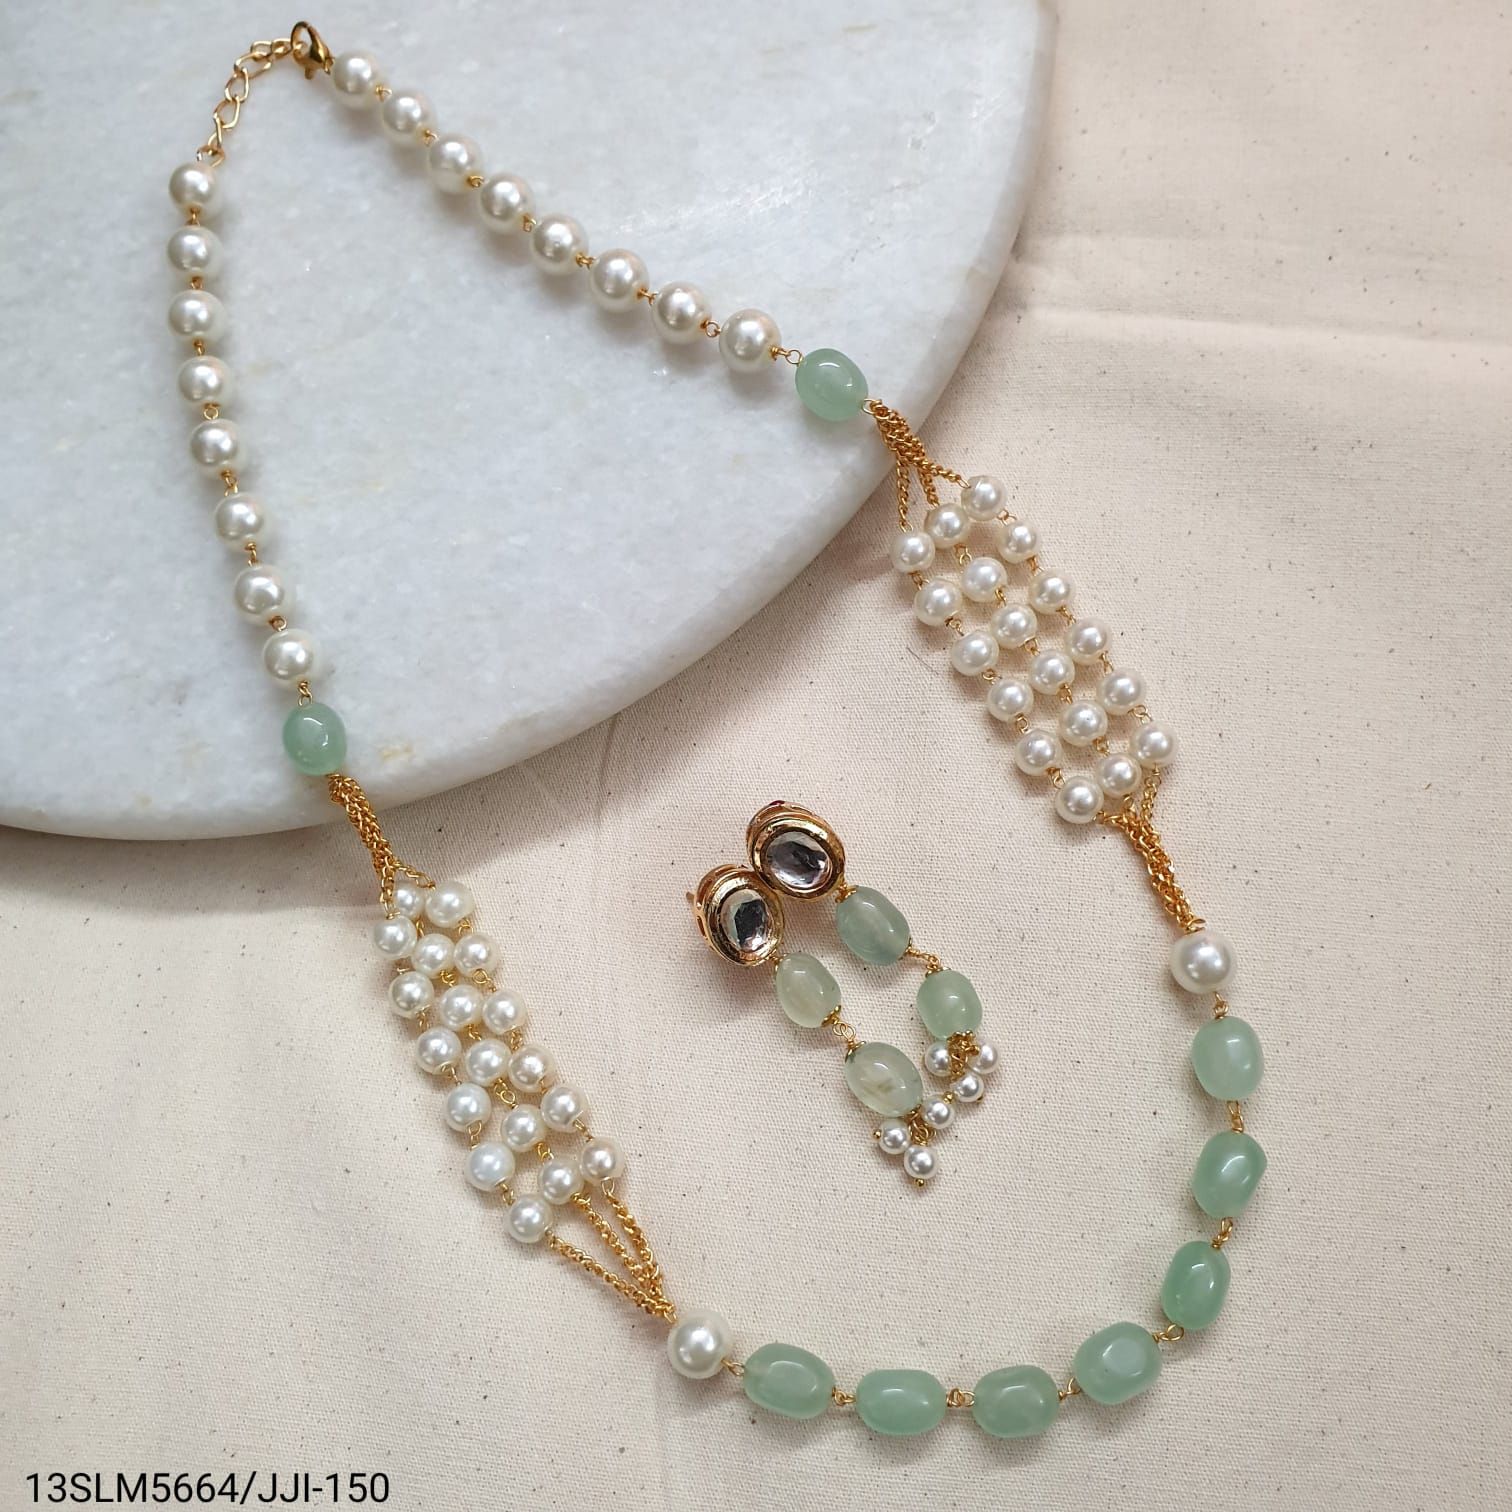 Green and Pearl Beaded Chain Necklace